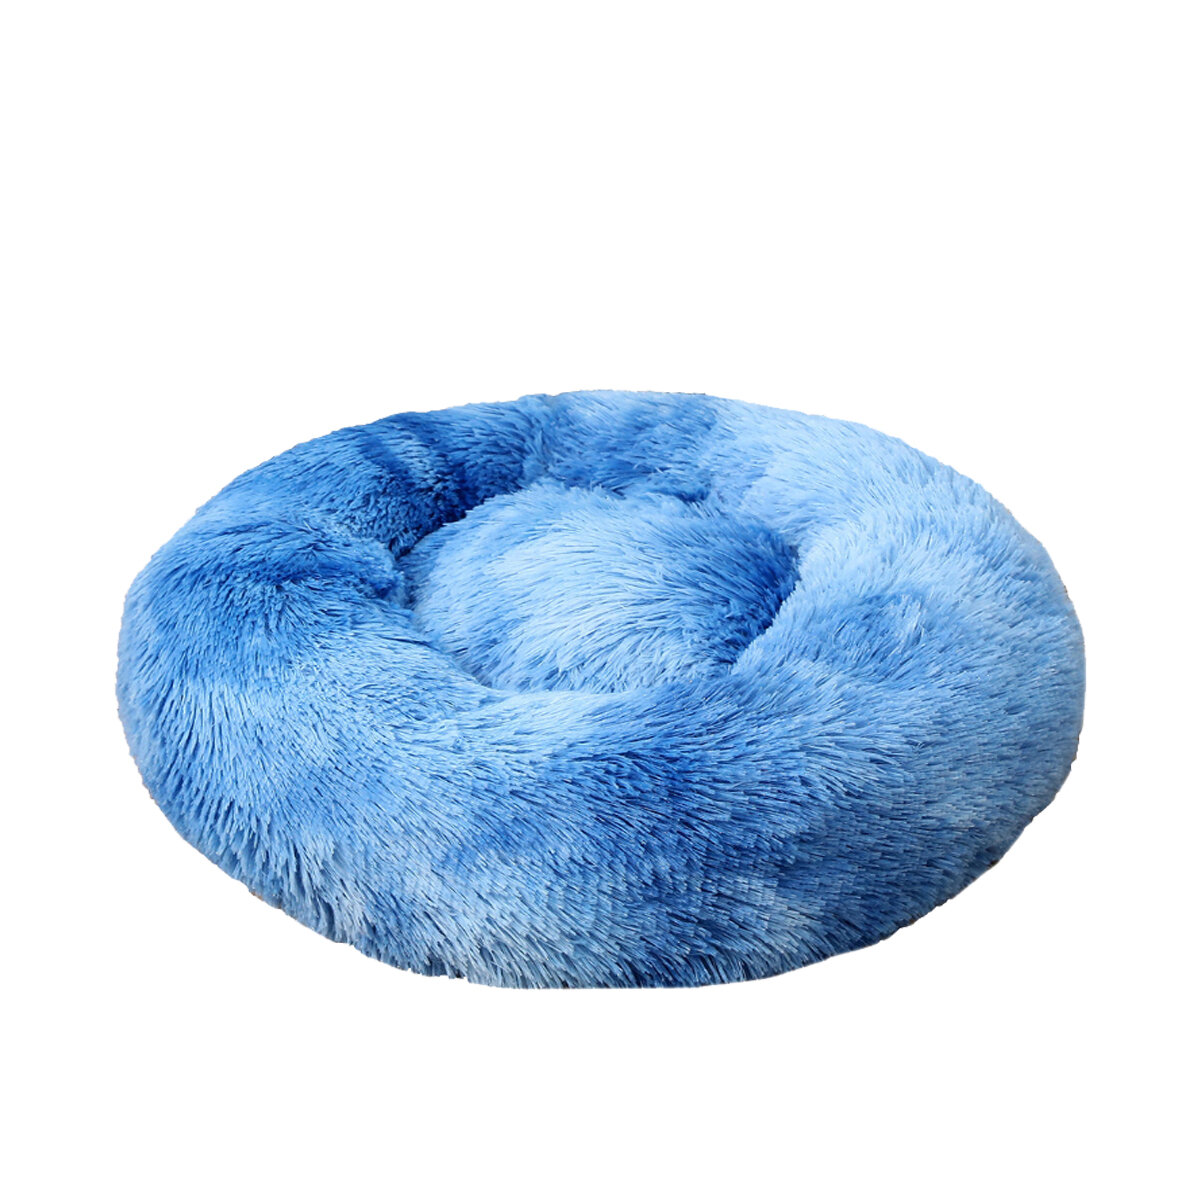 70cm Plush Fluffy Soft Pet Bed for Cats & Dogs Calming Bed Pad Soft Mat Home-heyidear